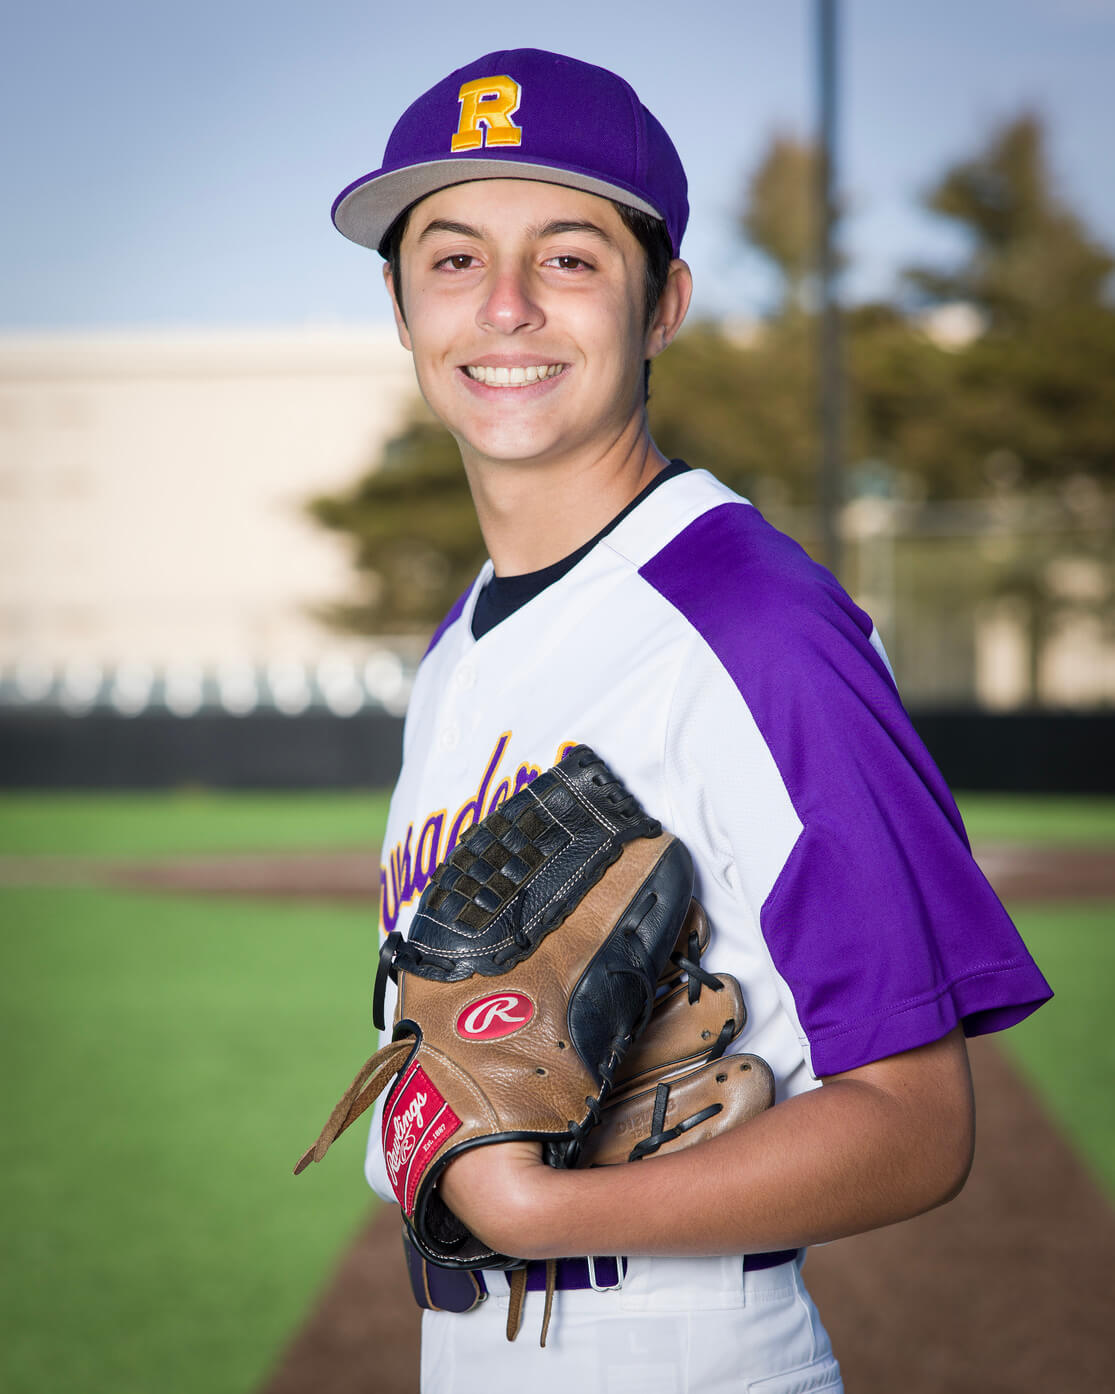 Quality high school team and individual sports portraiture for sports teams, leagues, and schools